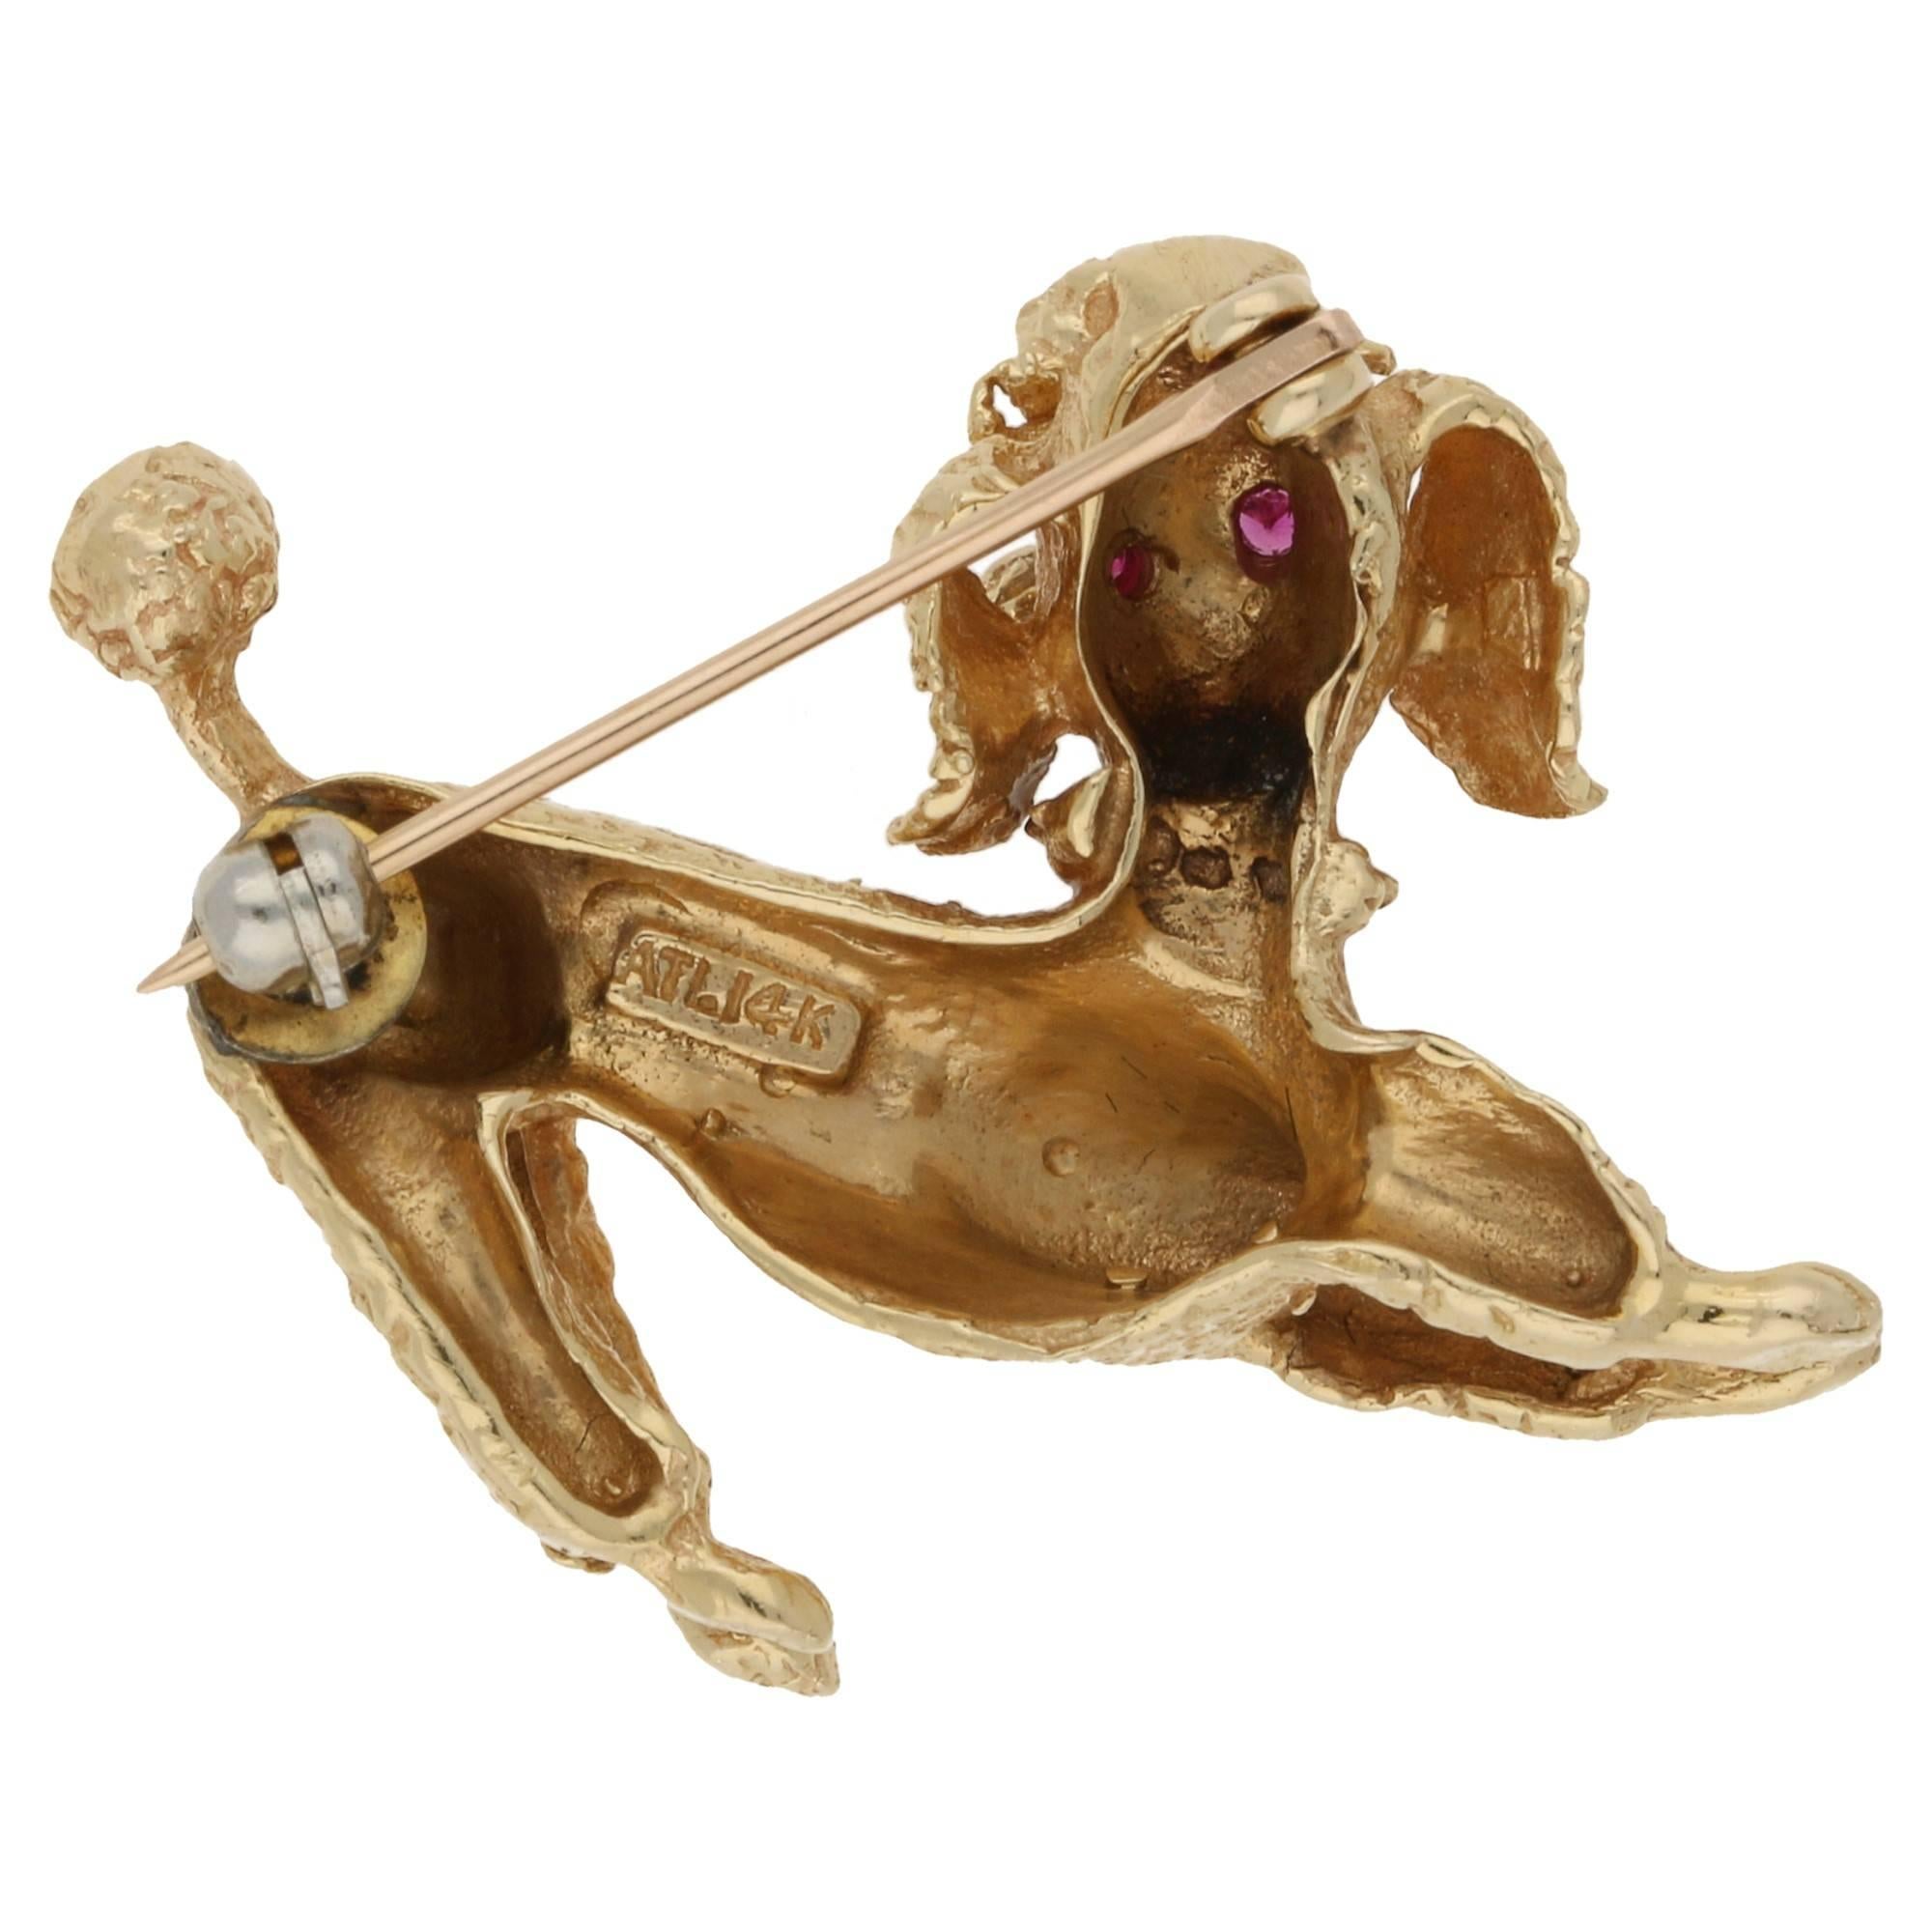 A lifelike 1950's 14ct yellow gold poodle brooch with round faceted ruby eyes. Contact us if you would like more photos or information on this piece. 